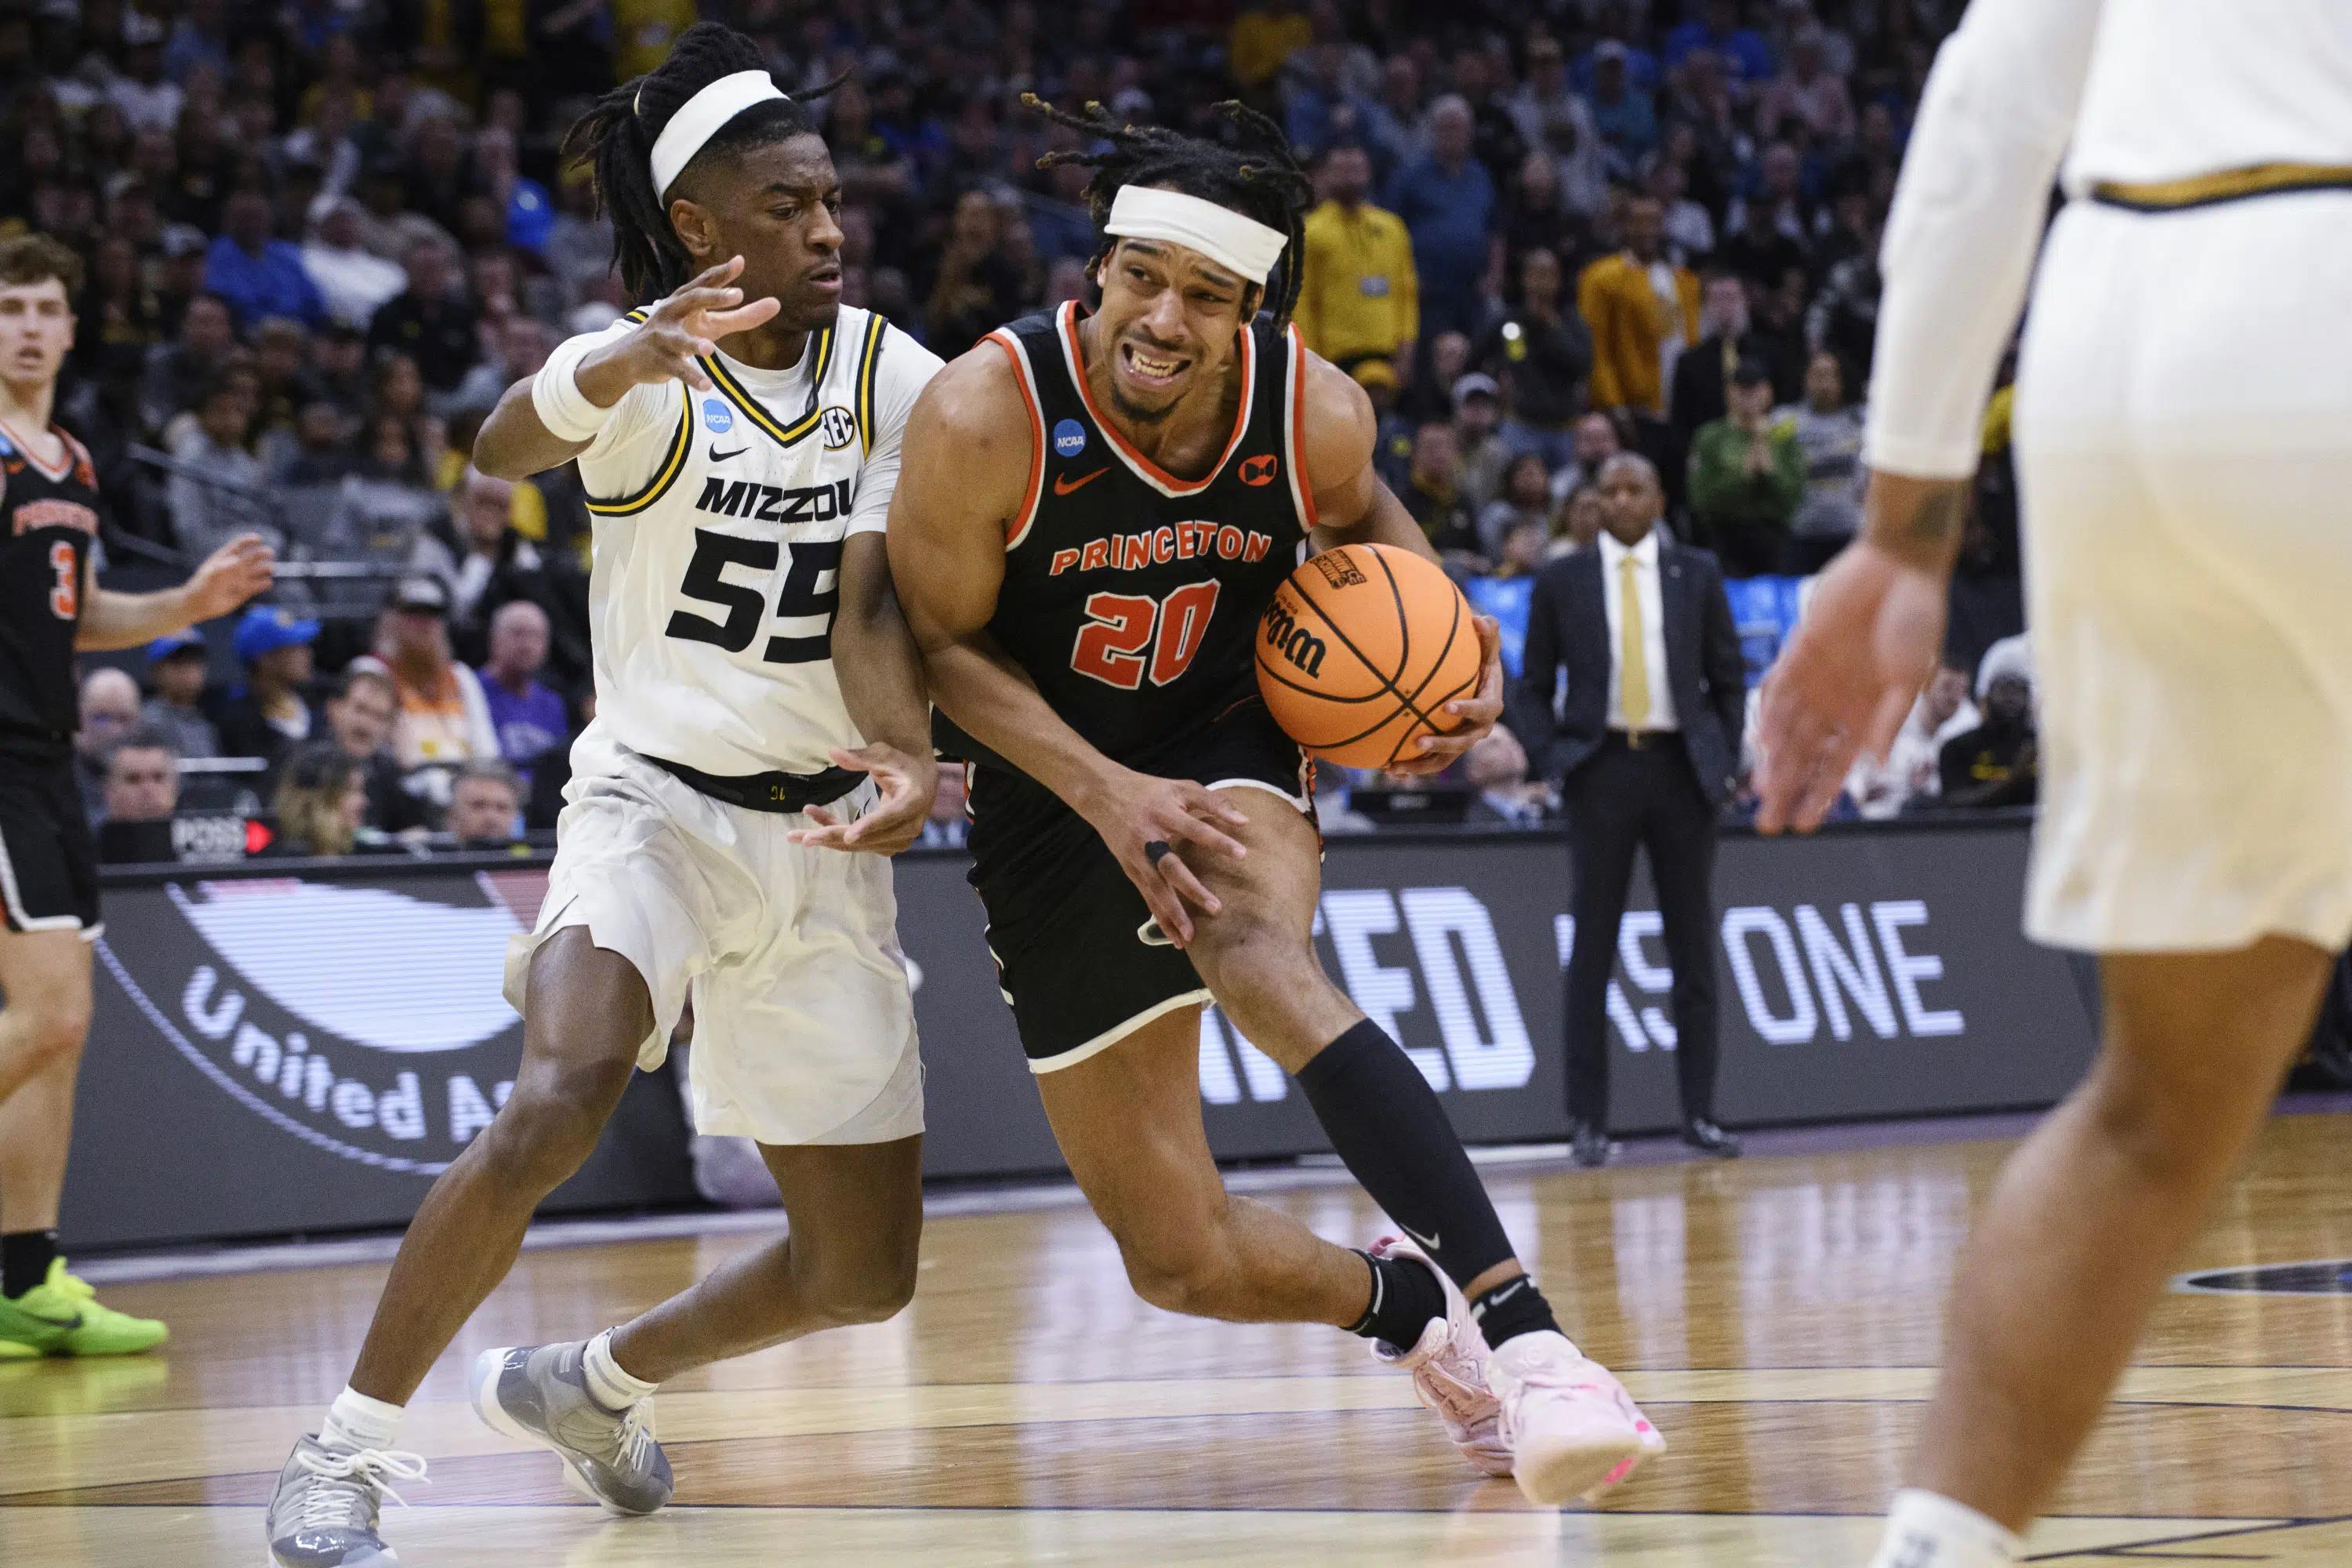 Princeton’s trip will be the face of March Madness’s COVID era